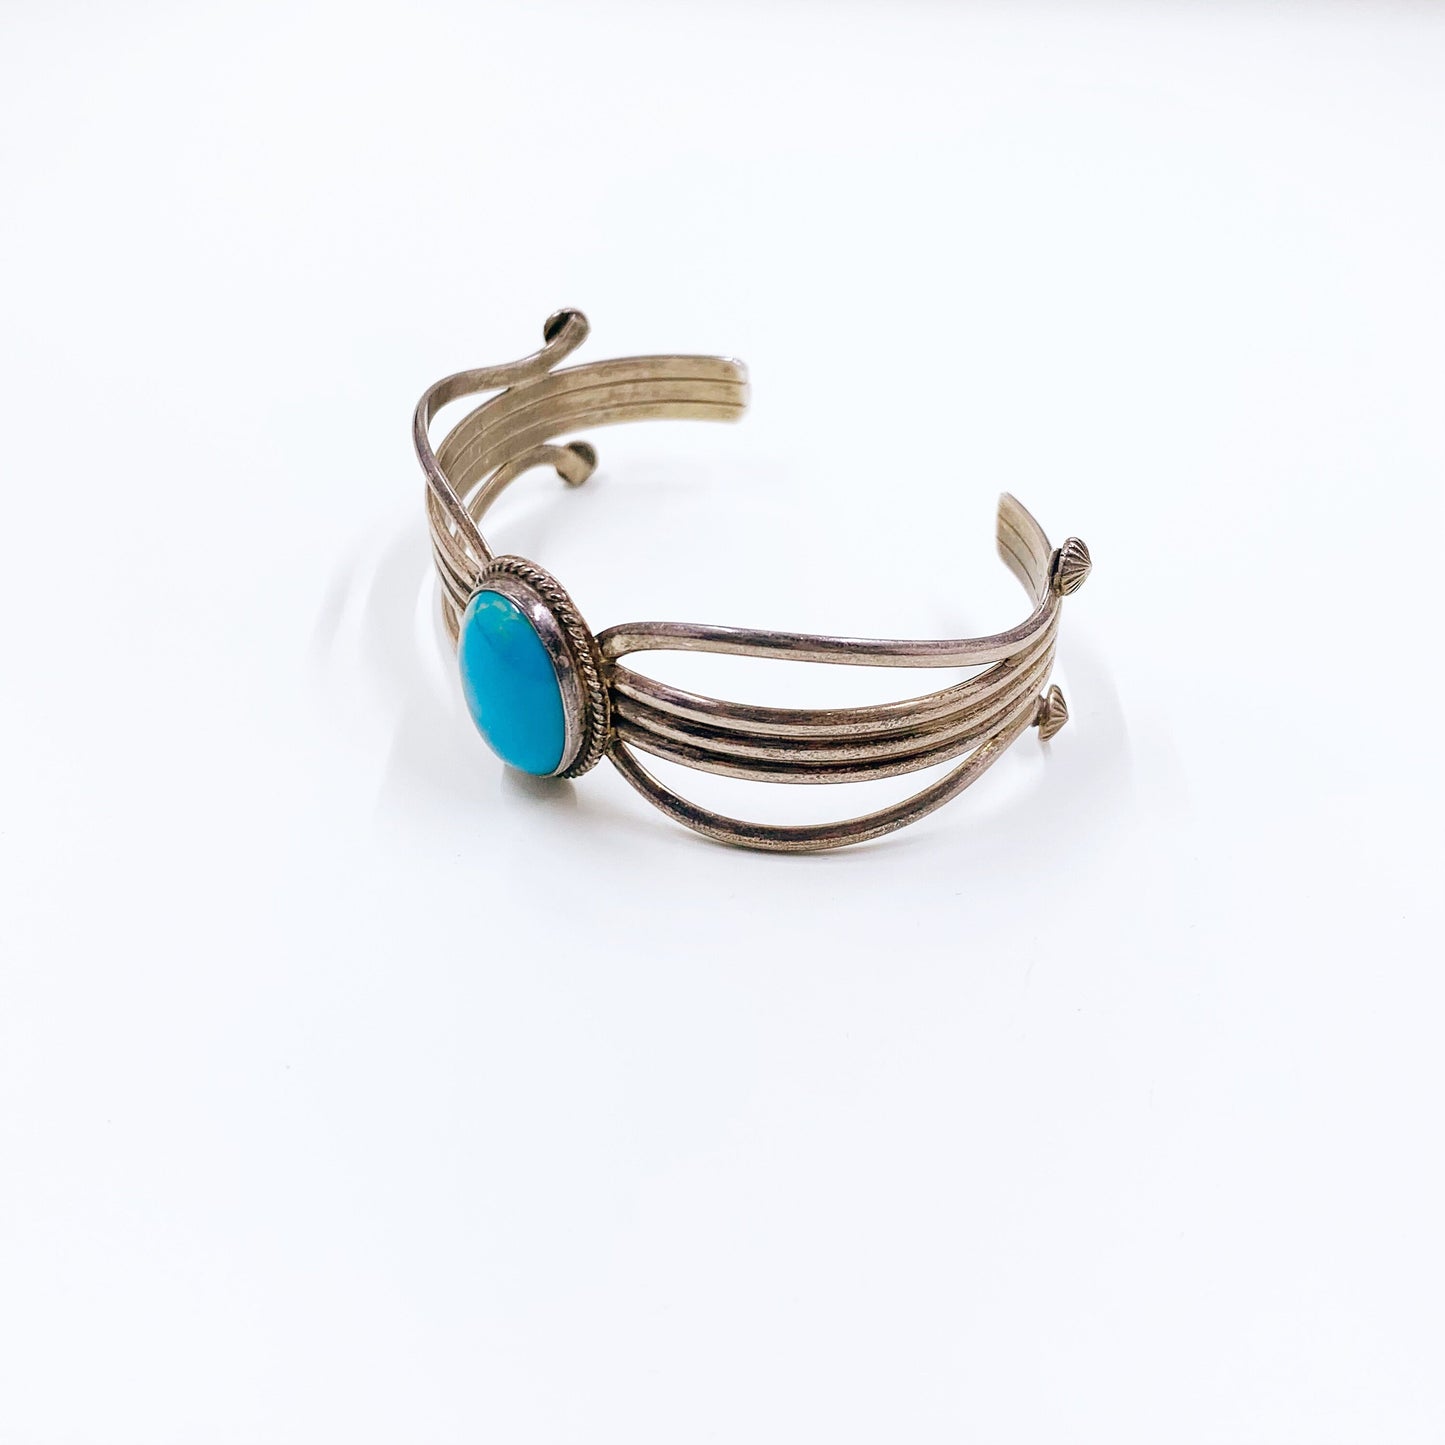 Vintage Silver Turquoise Cuff | Signed Southwest Silver Cuff Bracelet